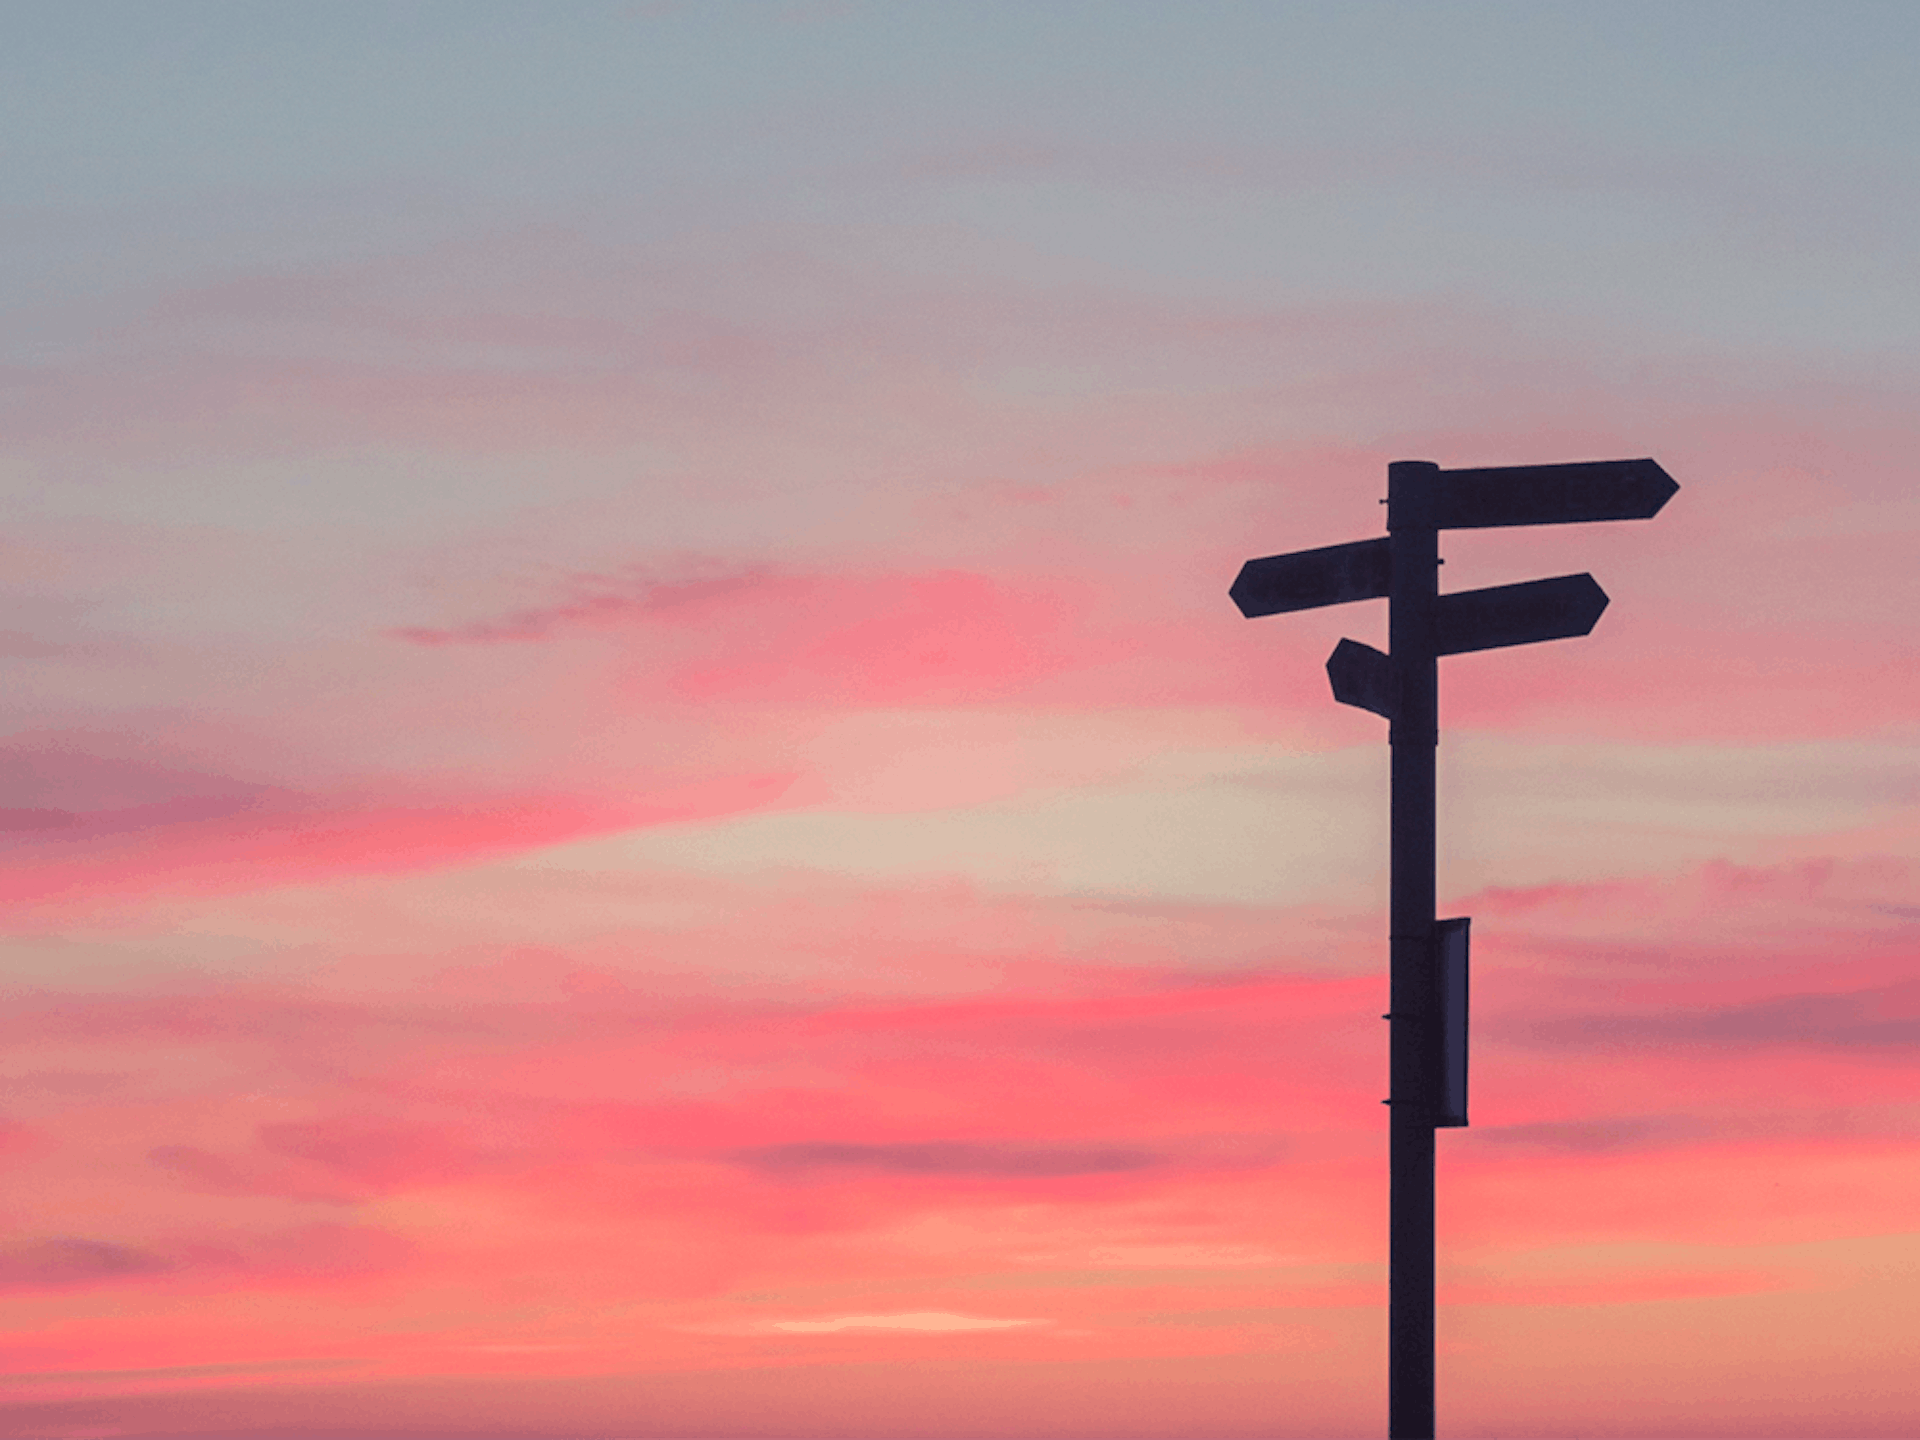 A sign post pointing in multiple directions with a pastel-coloured sky in the background.